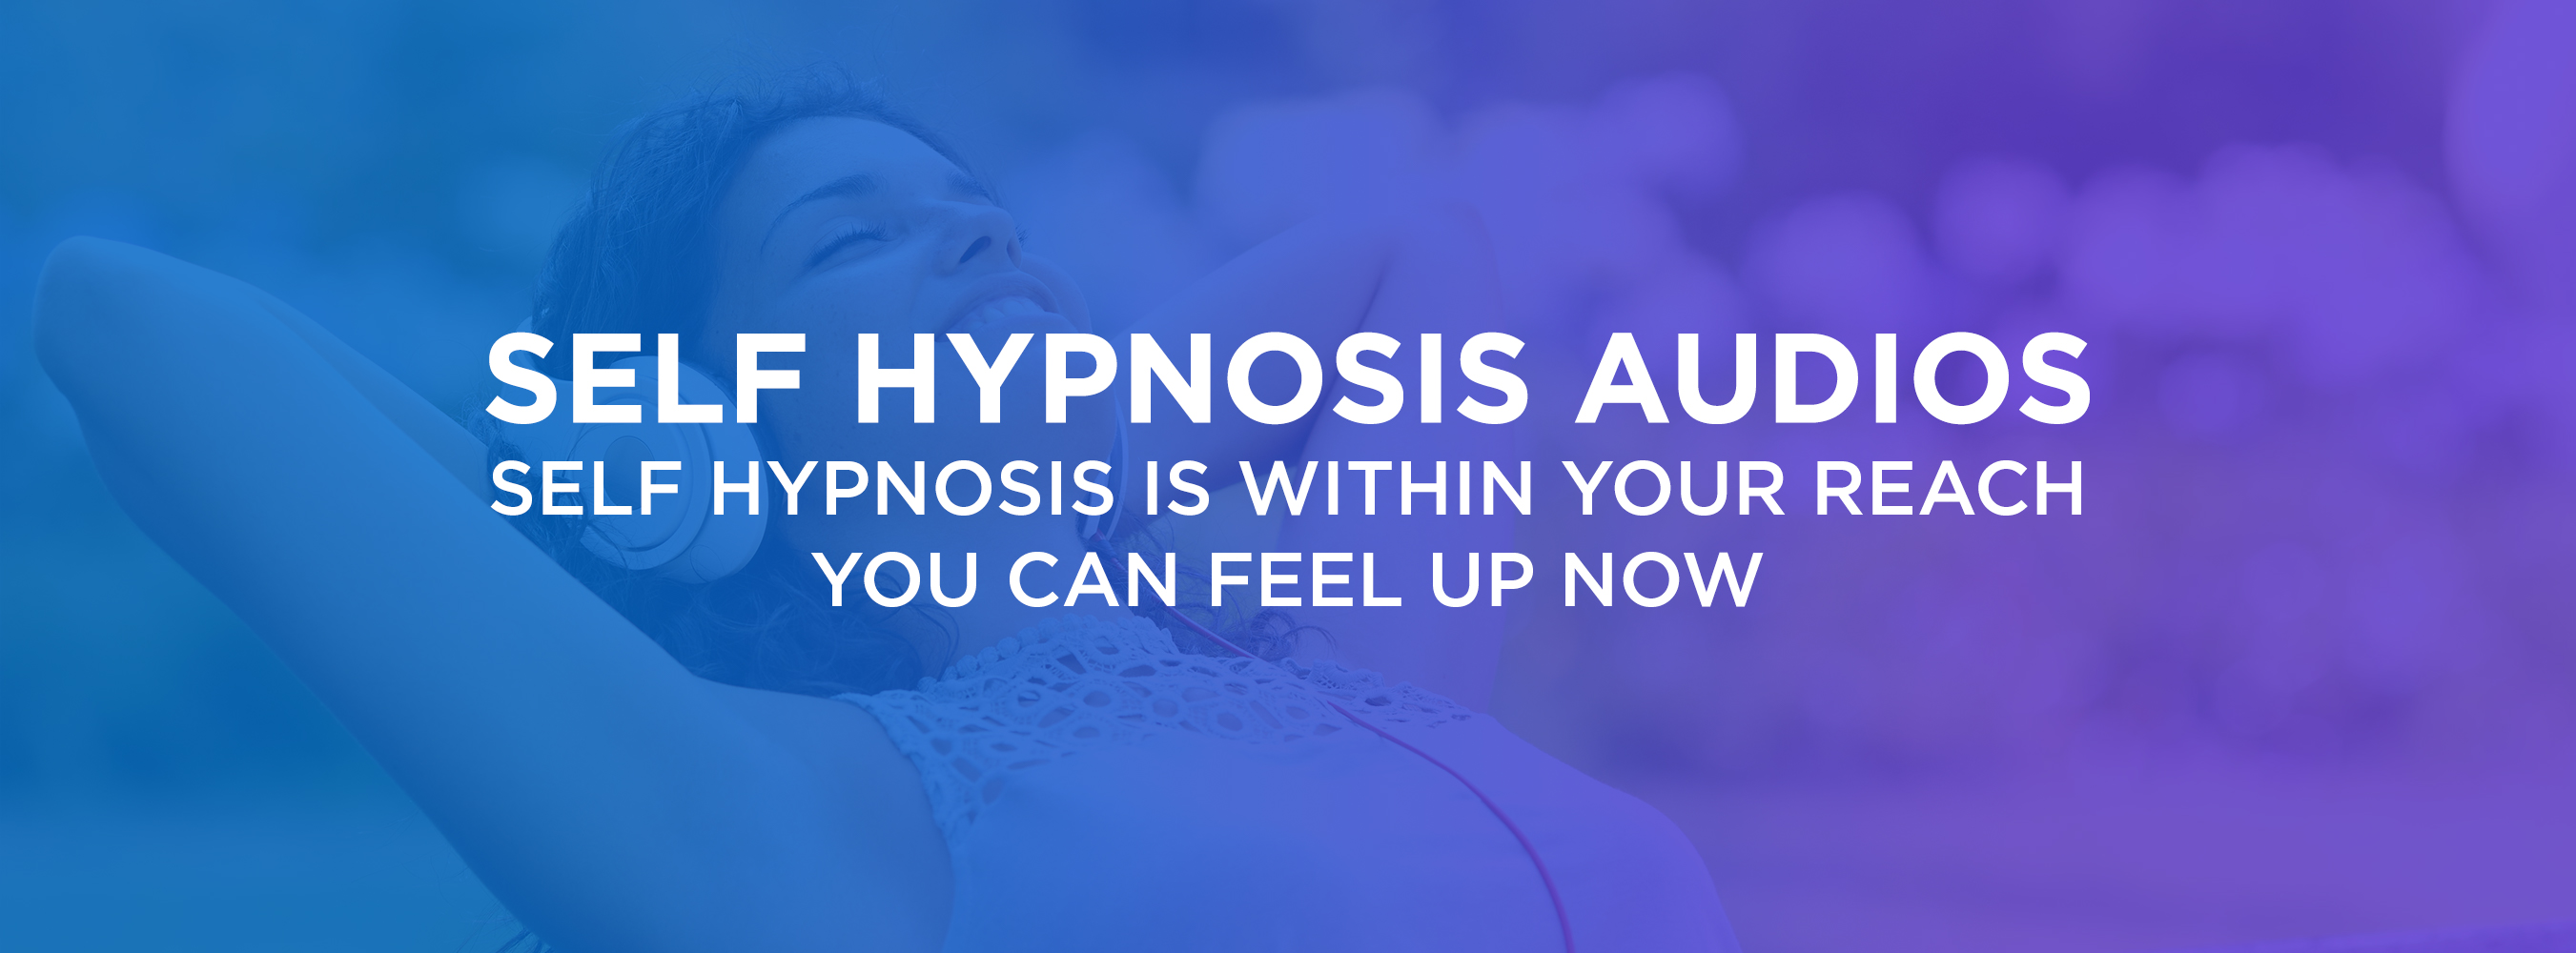 UpNow Partners with Cathay Pacific Airways Bringing Hypnotherapy In-Flight